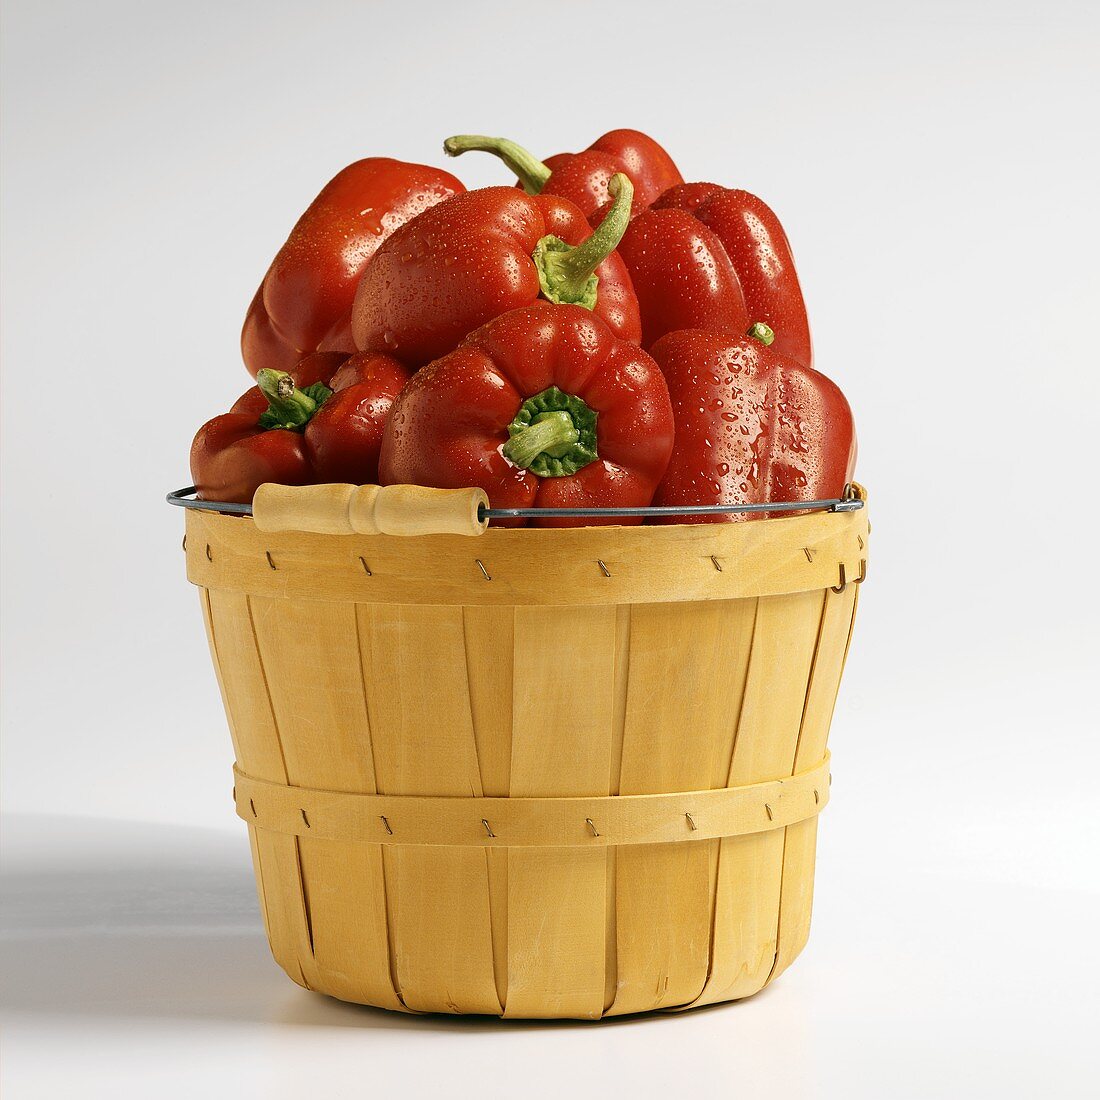 Wooden Market Basket Filled with Red Bell Peppers with Dew on White Background